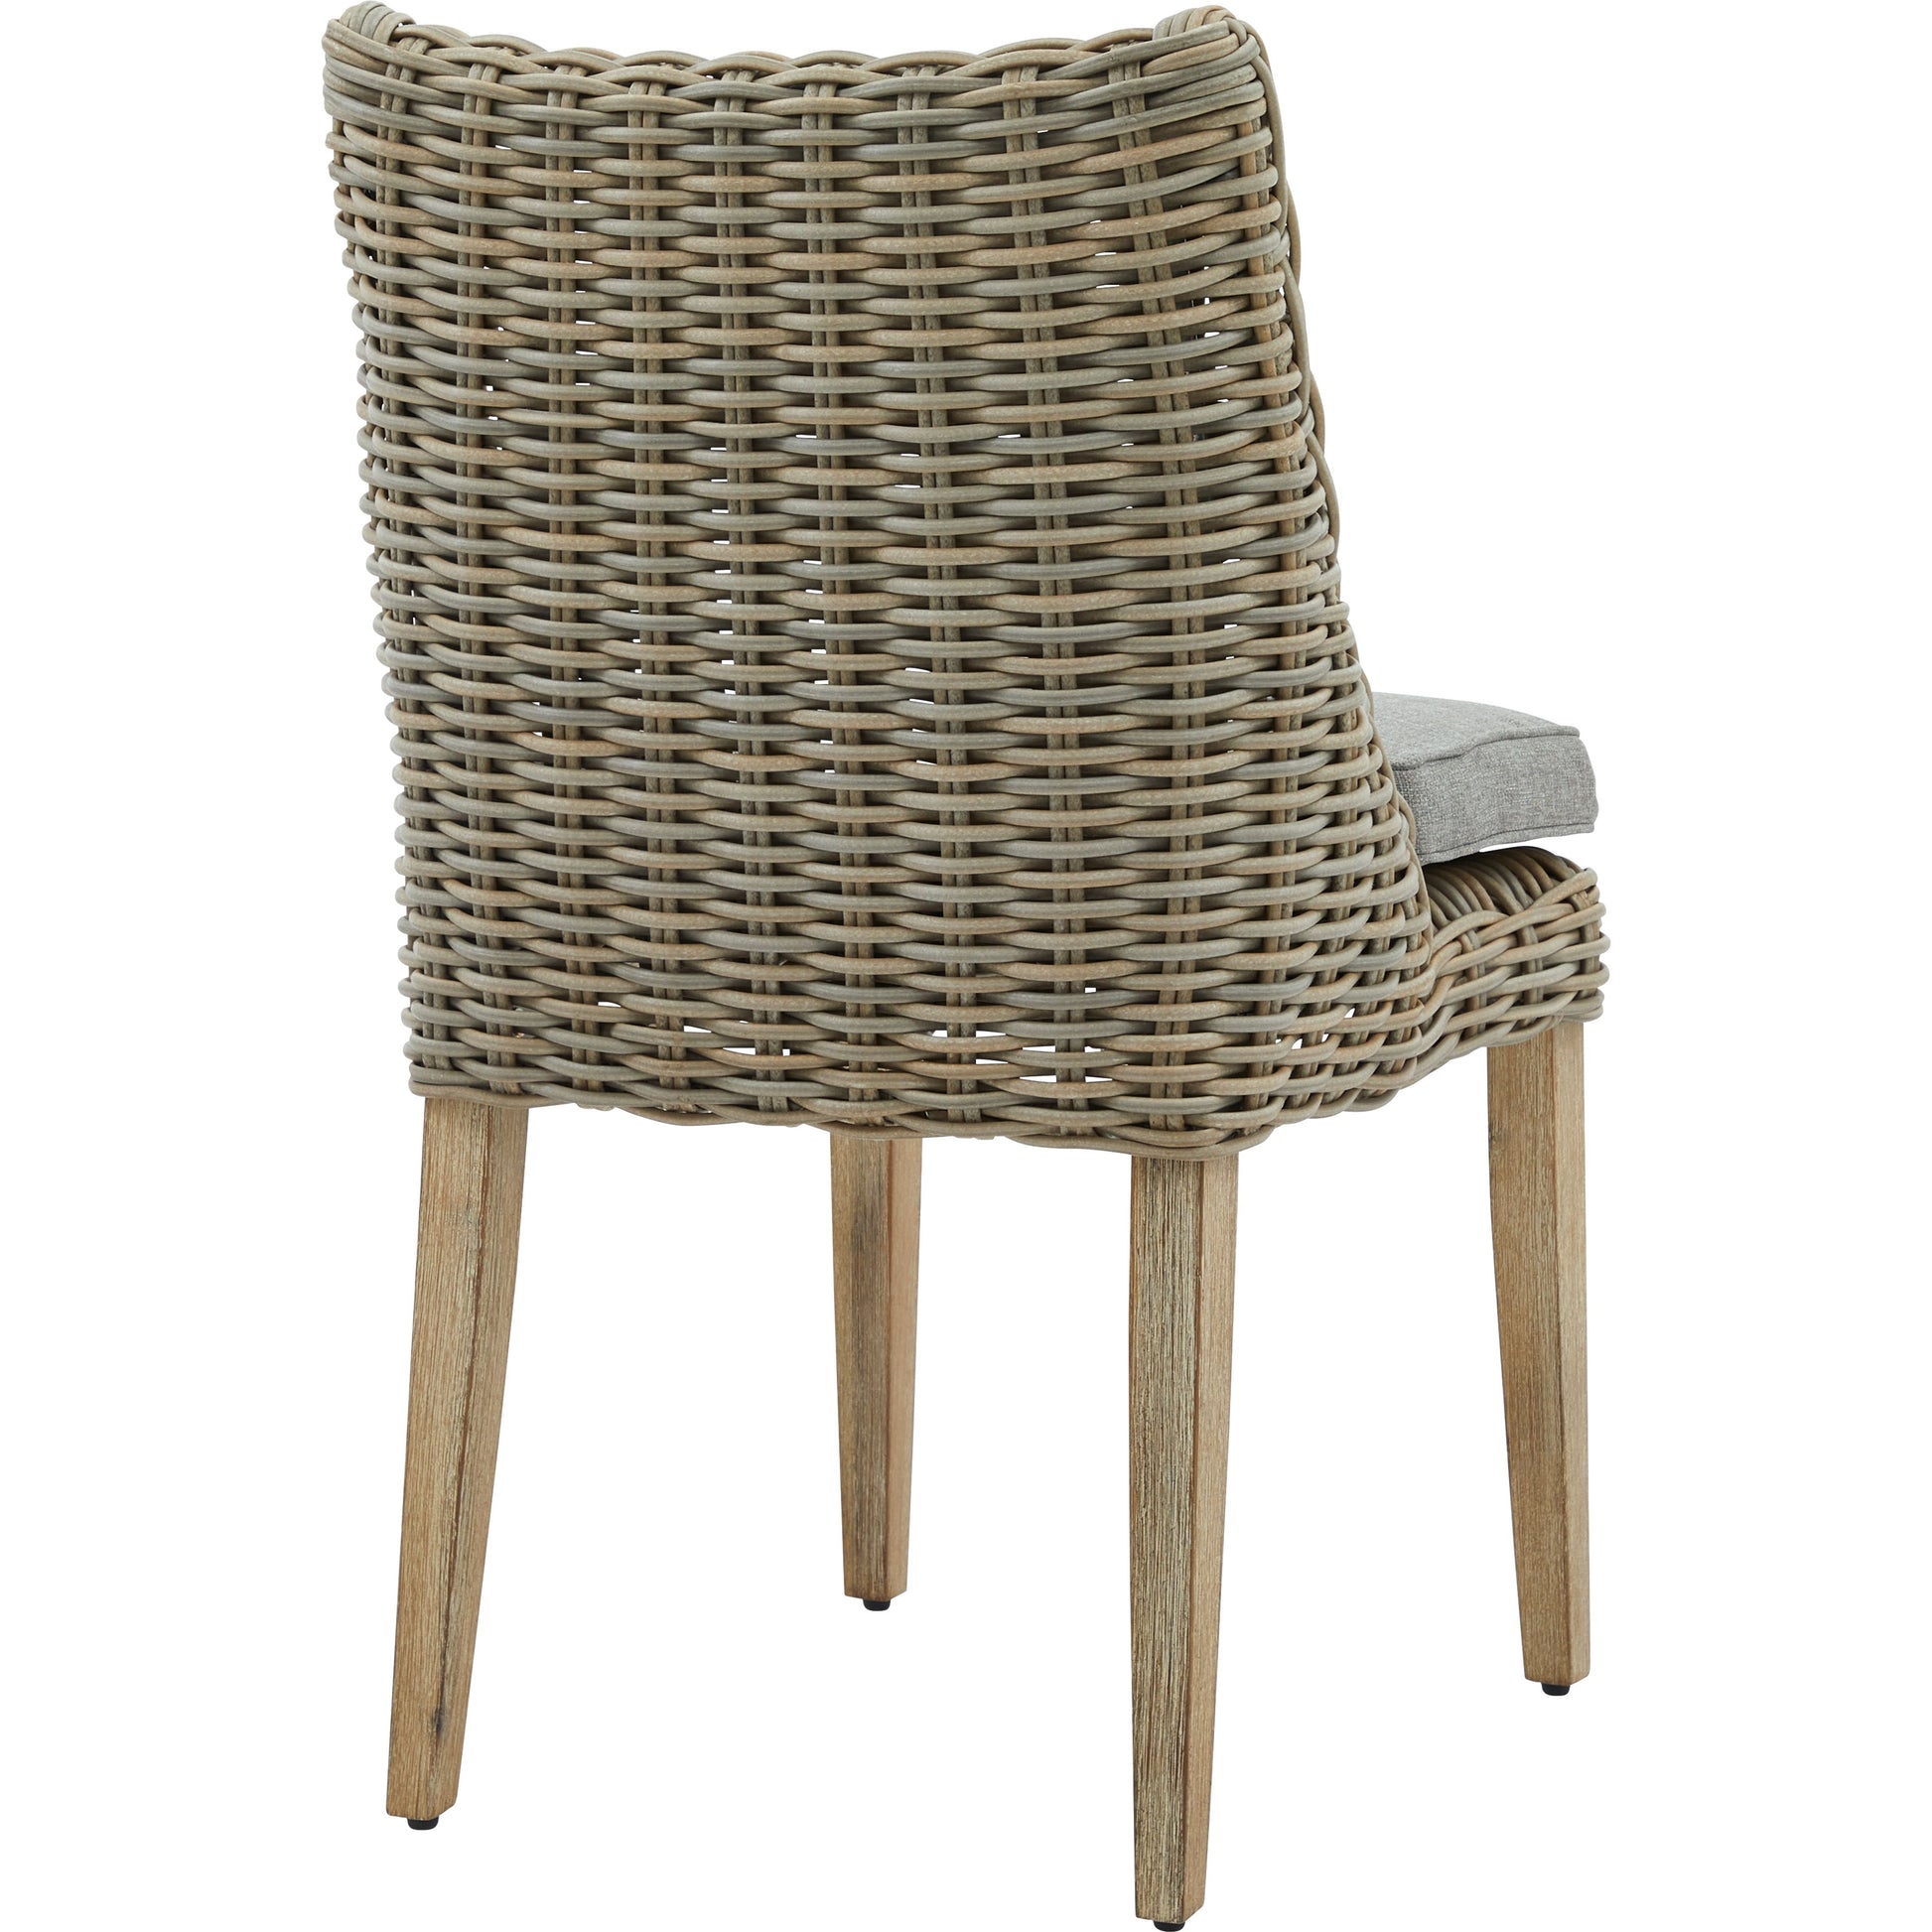 Capri Collection Outdoor Round Dining Chair - Ashton and Finch